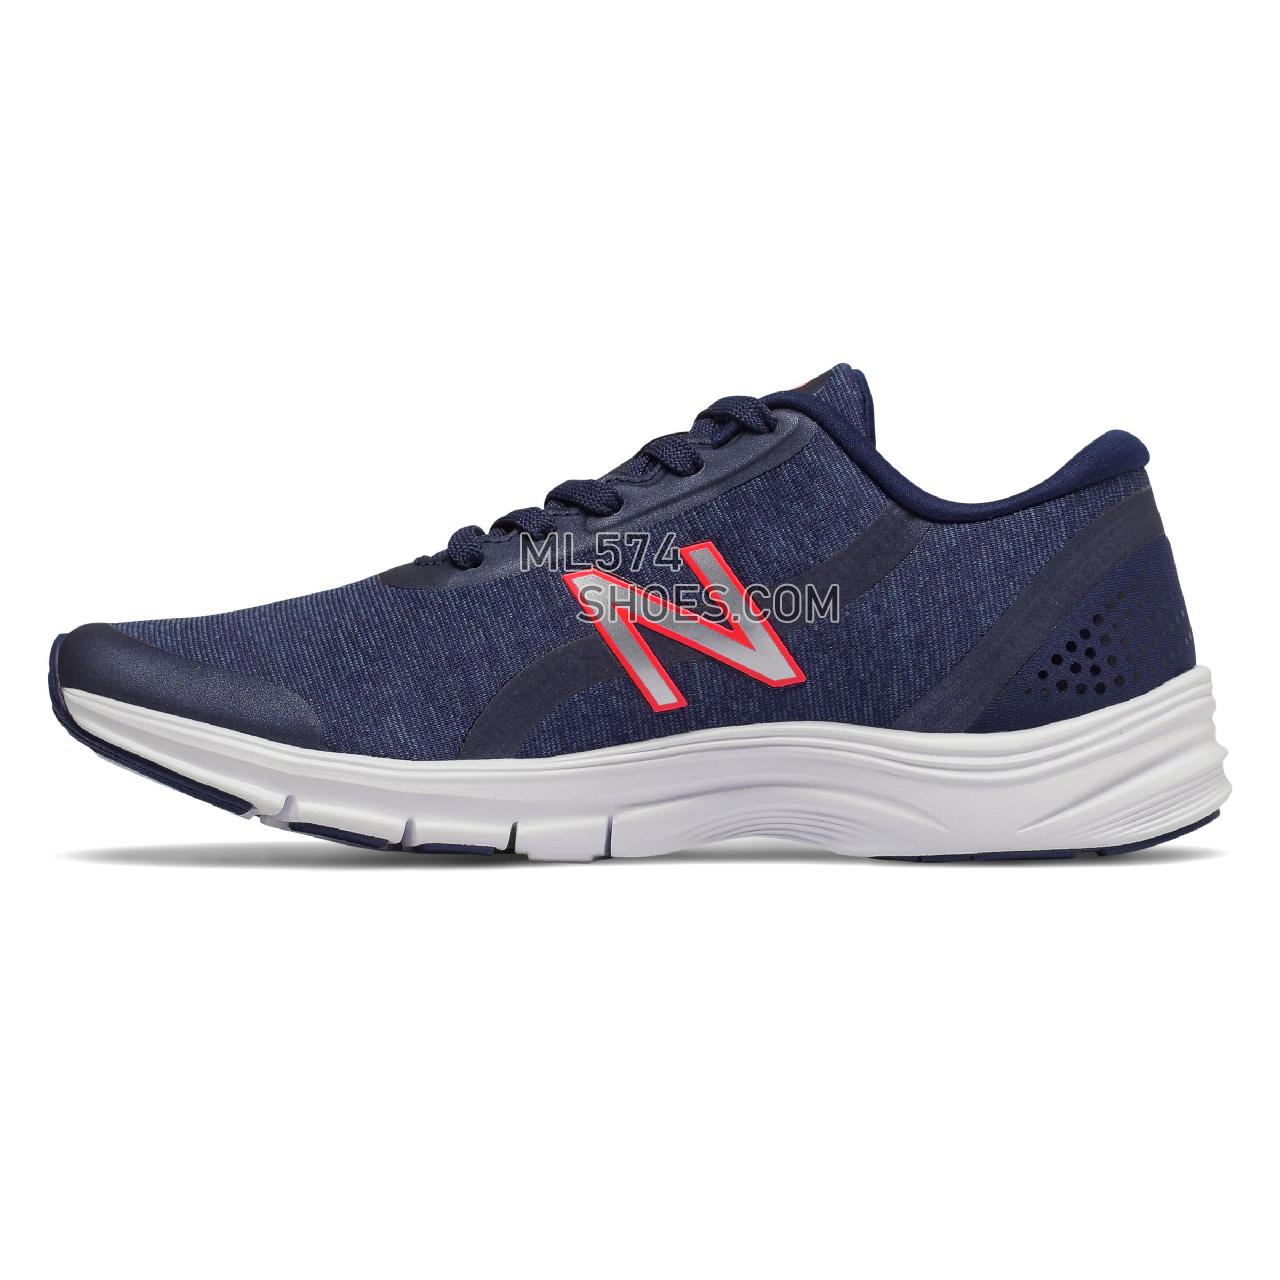 New Balance 711v3 Mesh Trainer - Women's 711 - X-training Pigment with Pink Zing - WX711SB3